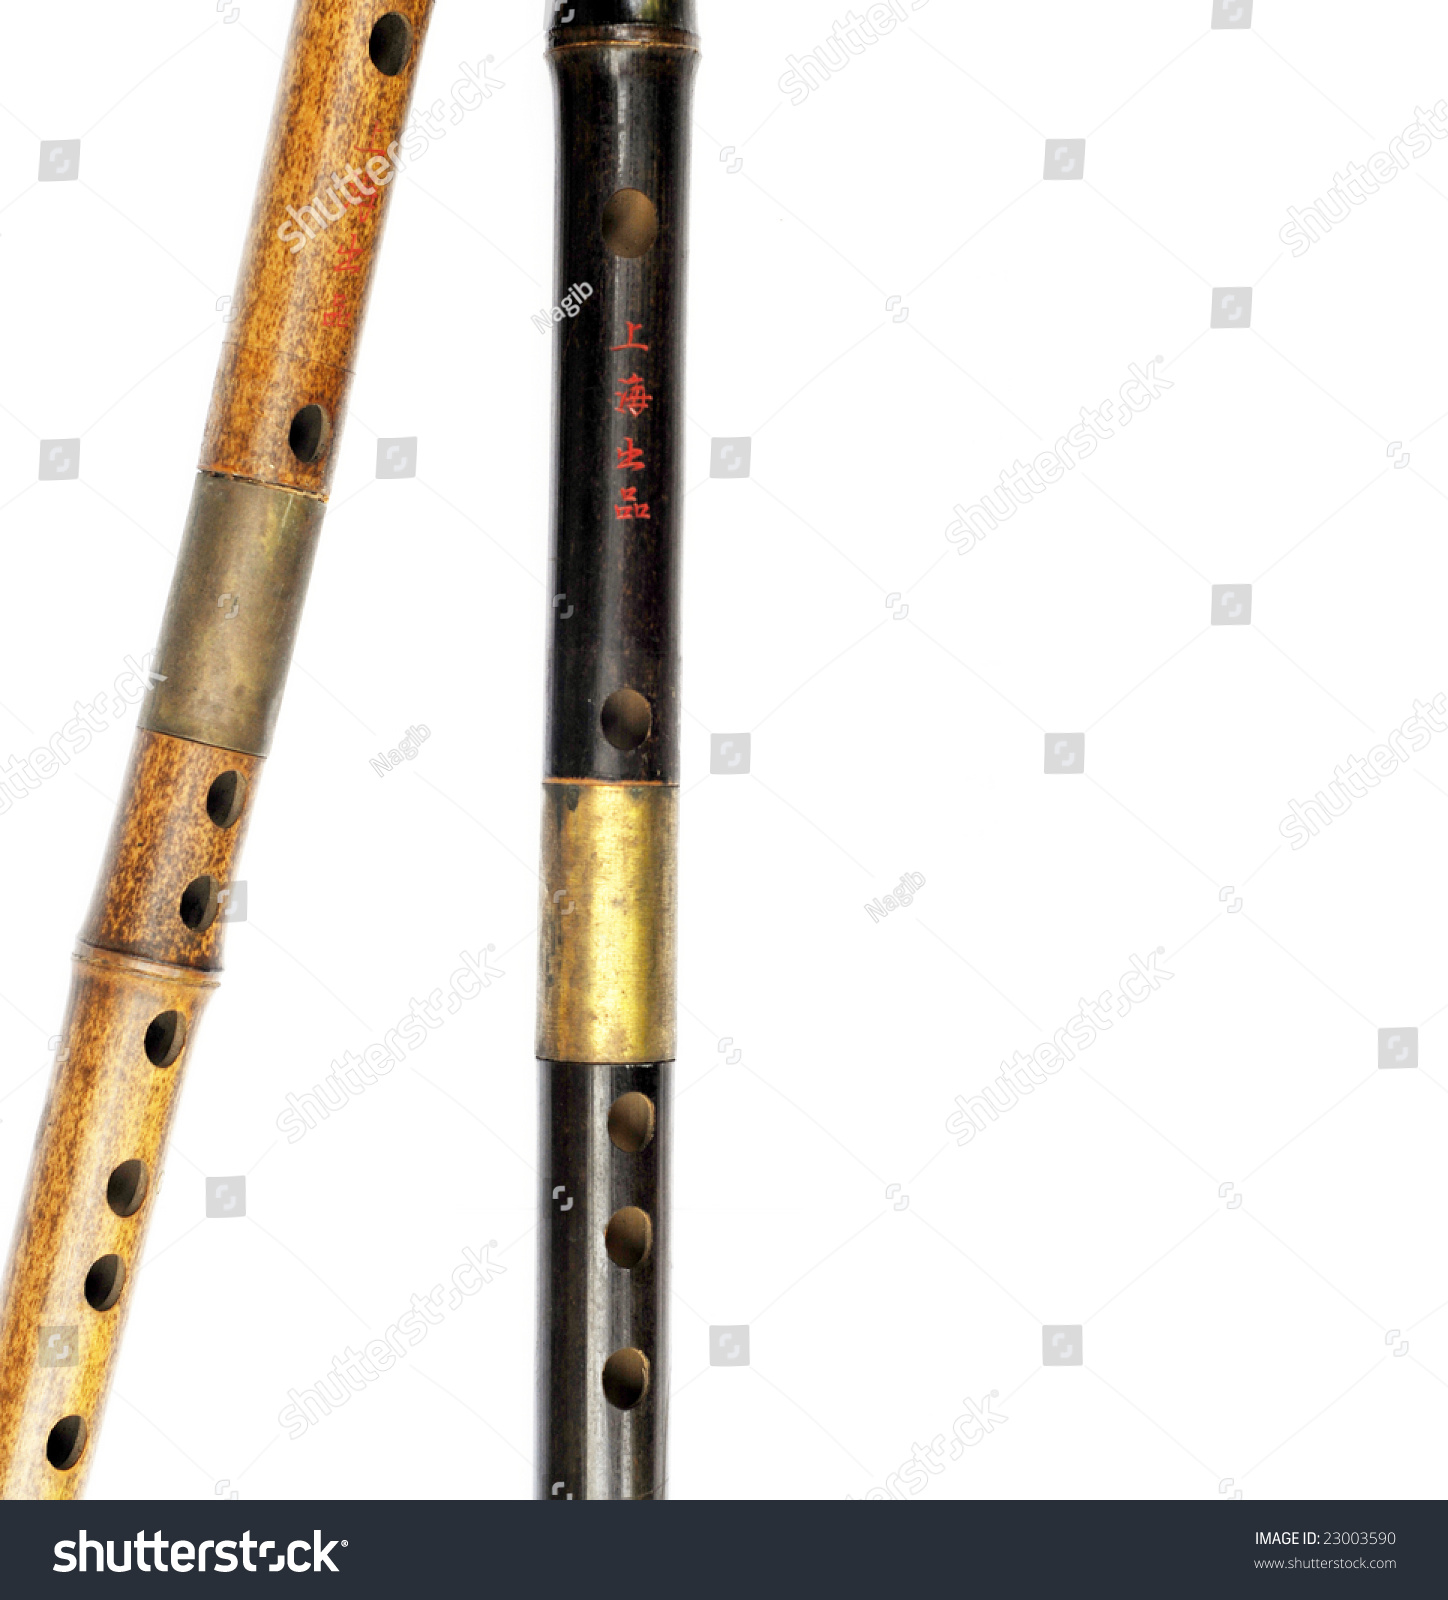 Close-Up Of Lovely Chinese Flutes Stock Photo 23003590 : Shutterstock